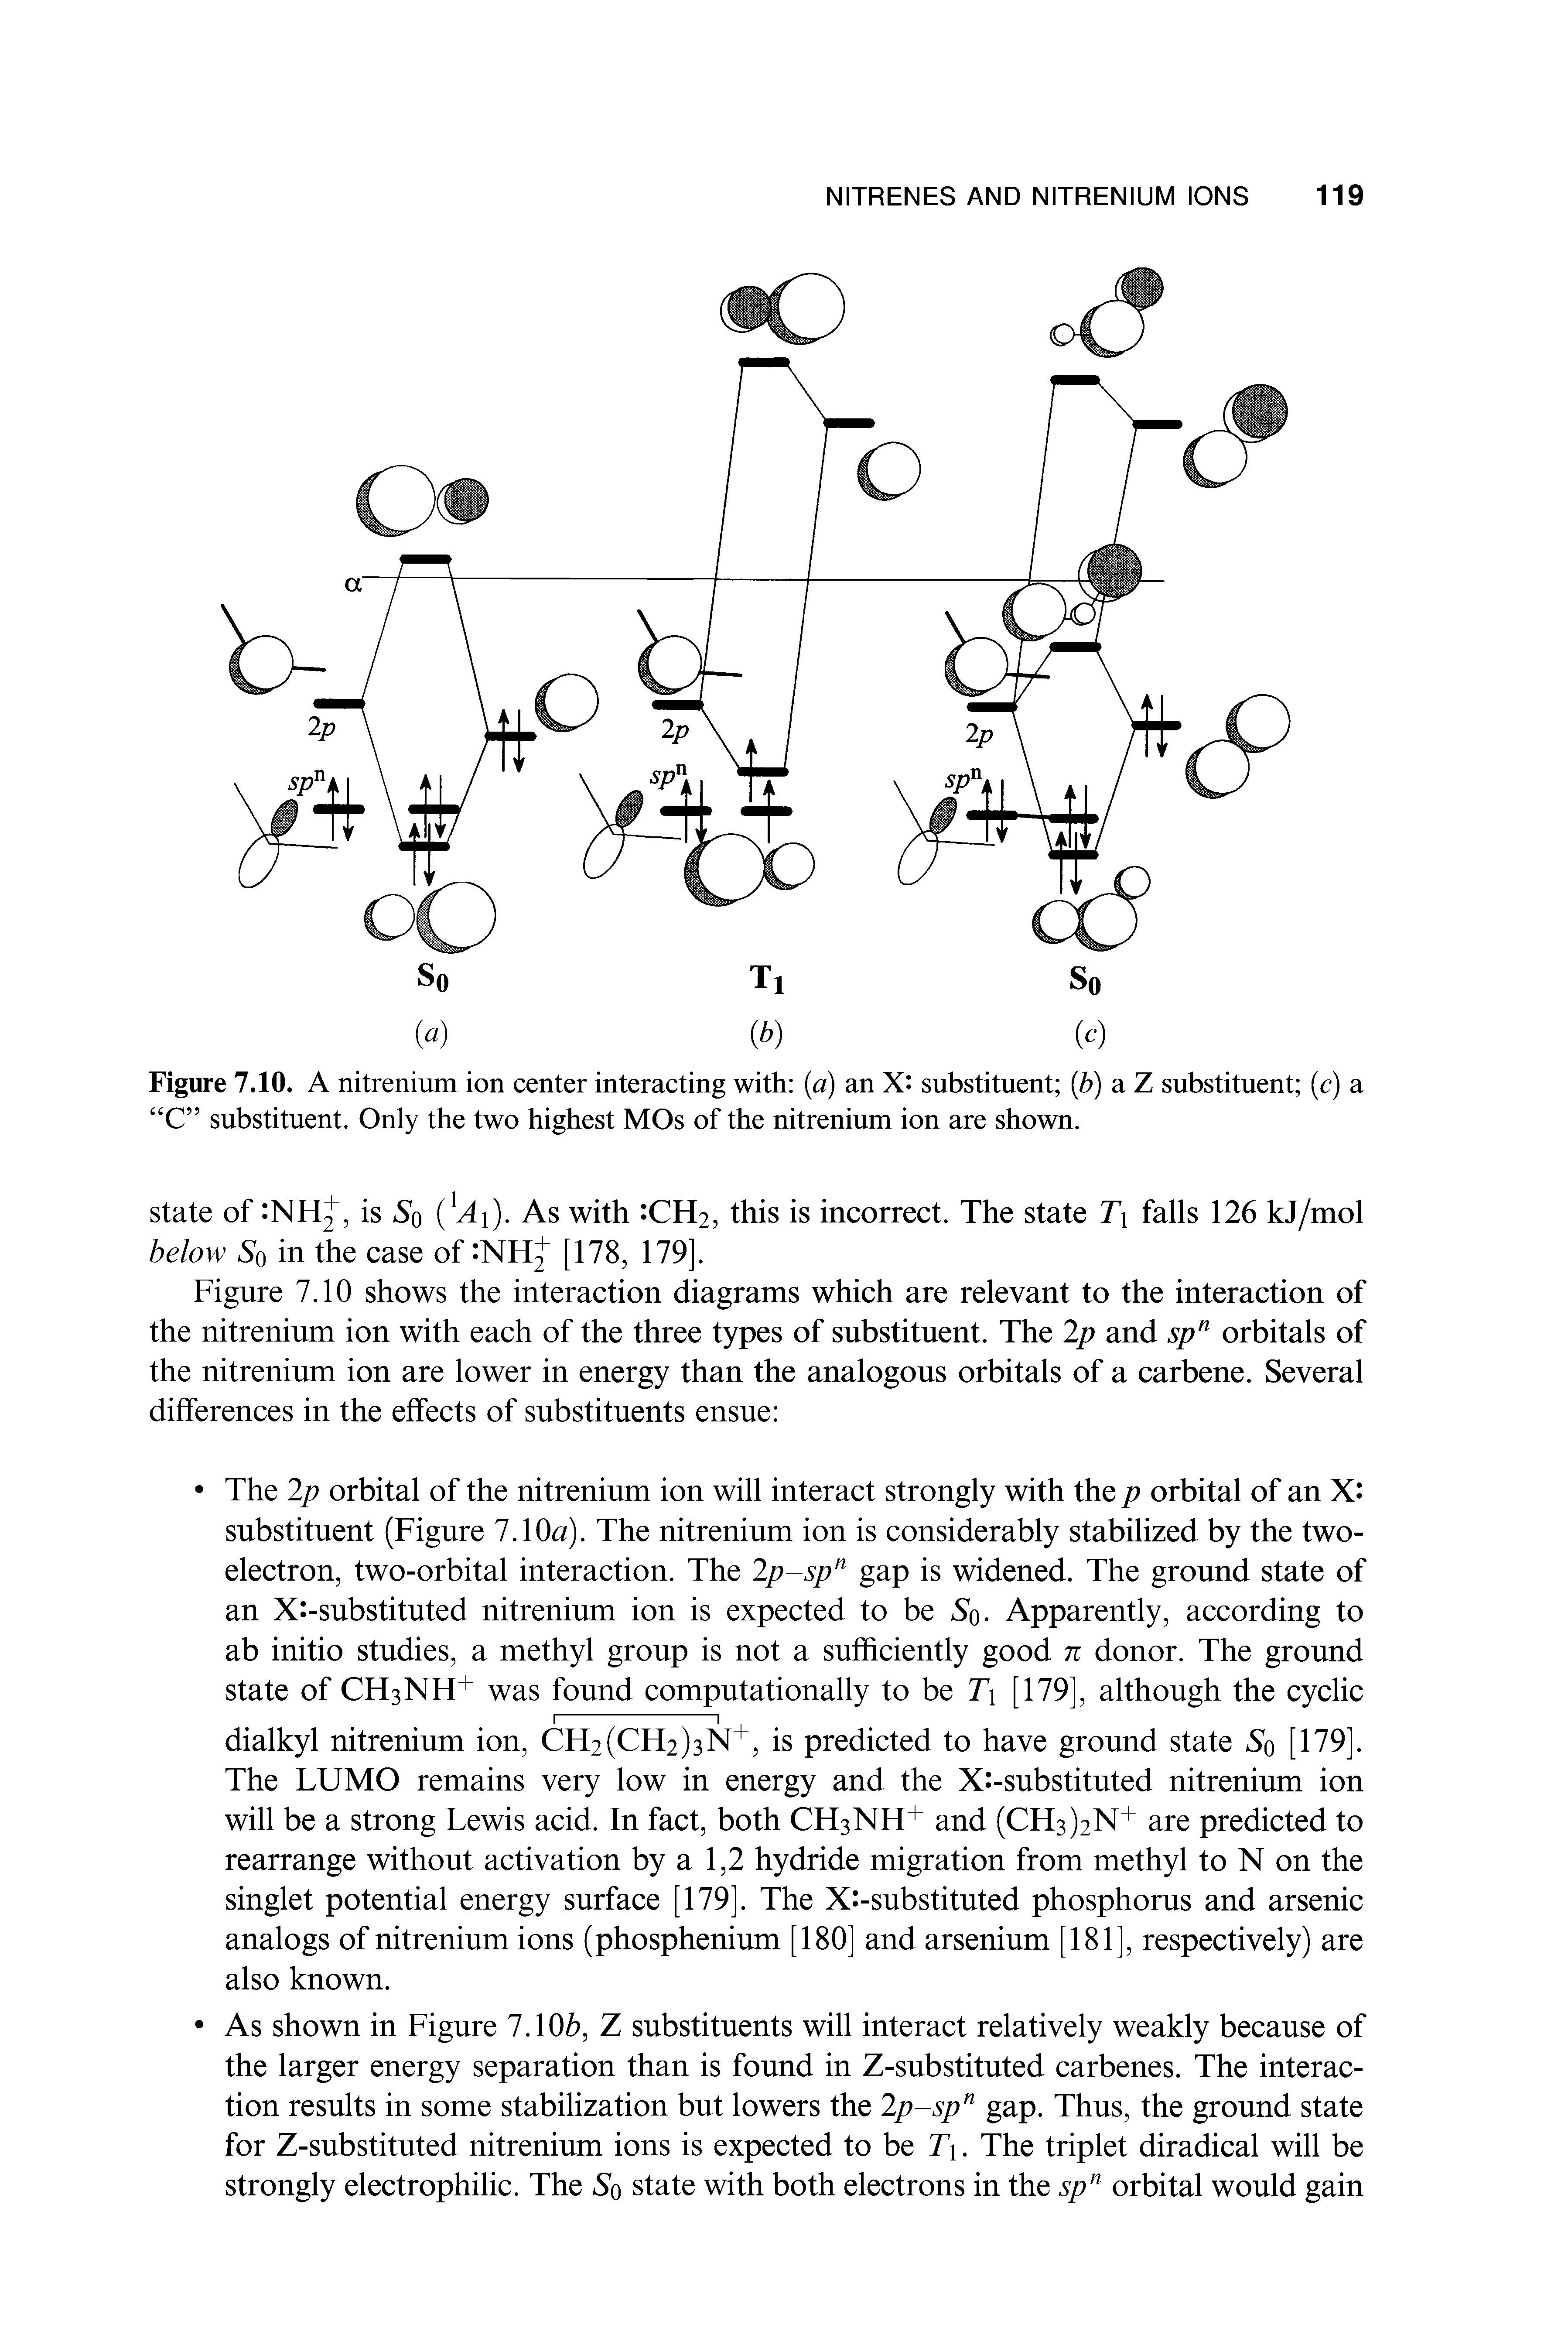 Figure 7.10 shows the interaction diagrams which are relevant to the interaction of the nitrenium ion with each of the three types of substituent. The 2p and spn orbitals of the nitrenium ion are lower in energy than the analogous orbitals of a carbene. Several differences in the effects of substituents ensue ...